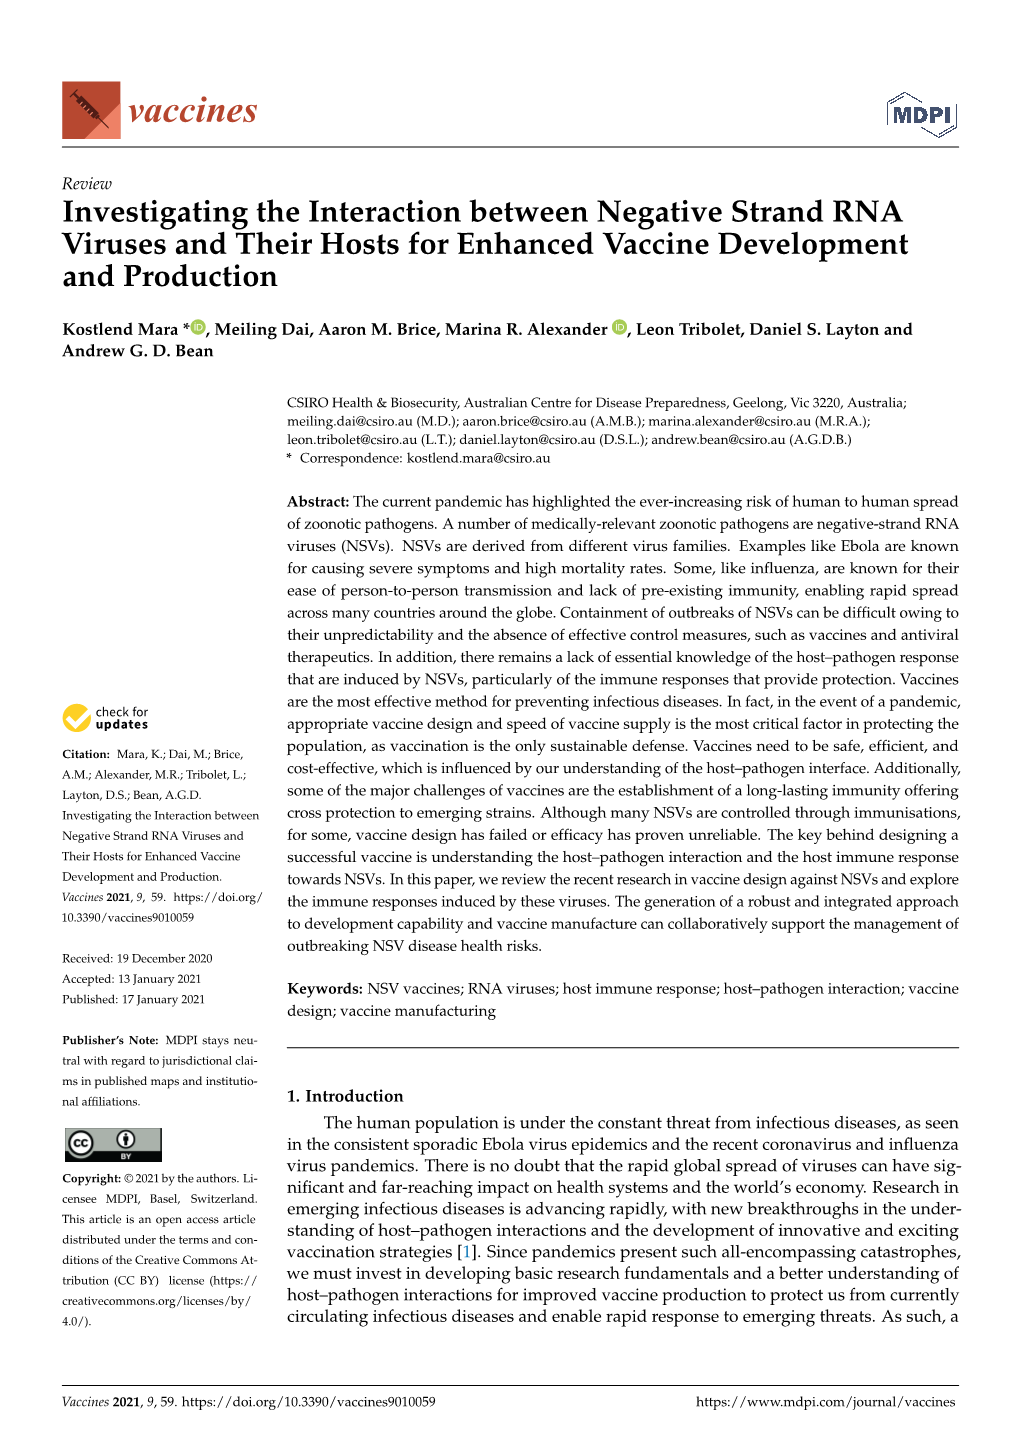 Investigating the Interaction Between Negative Strand RNA Viruses and Their Hosts for Enhanced Vaccine Development and Production